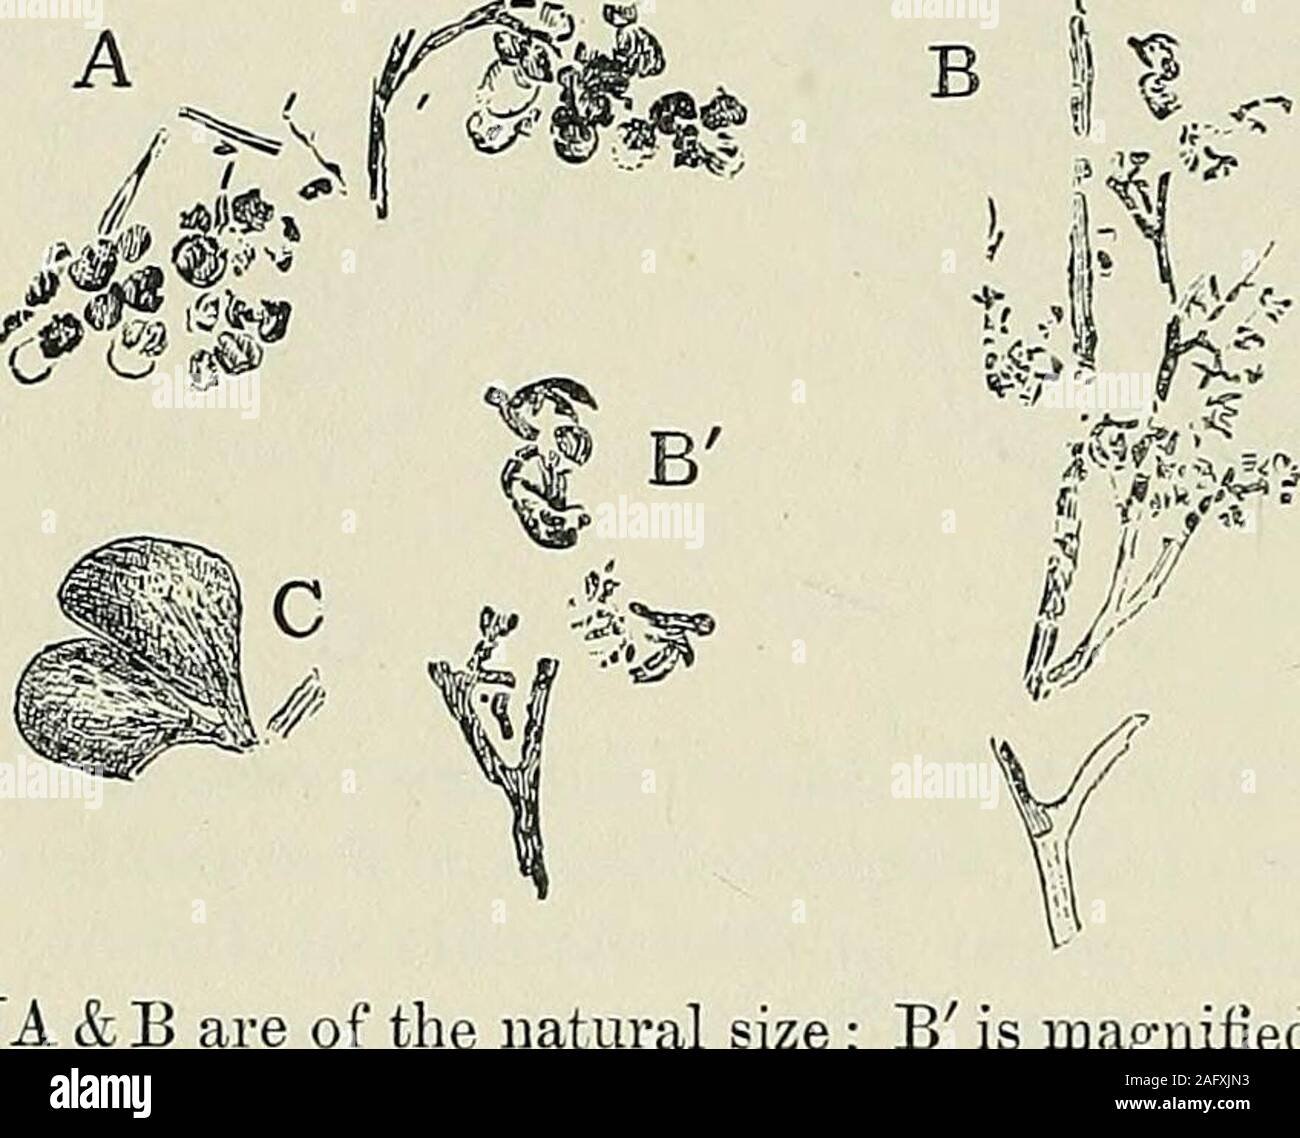 . The Quarterly journal of the Geological Society of London. 3) may bean indication of theirform. Xo sporangia havebeen recognized. The imperfect and bro-ken specimen representedof the natural size intext-fig. 3 B, affords thebest example of the habit of the fertile frond; at the apices ofa few of the branchlets are portions of the spore-masses. Apiece of the upper part of the specimen is shown twice the naturalsize in fig. 3 B. The occurrence of the fertile segments or spore-masses in connexion with the slender branches is shown moreclearly in PI. XII, fig. 12 a, and in text-fig. 3 A. One of Stock Photo